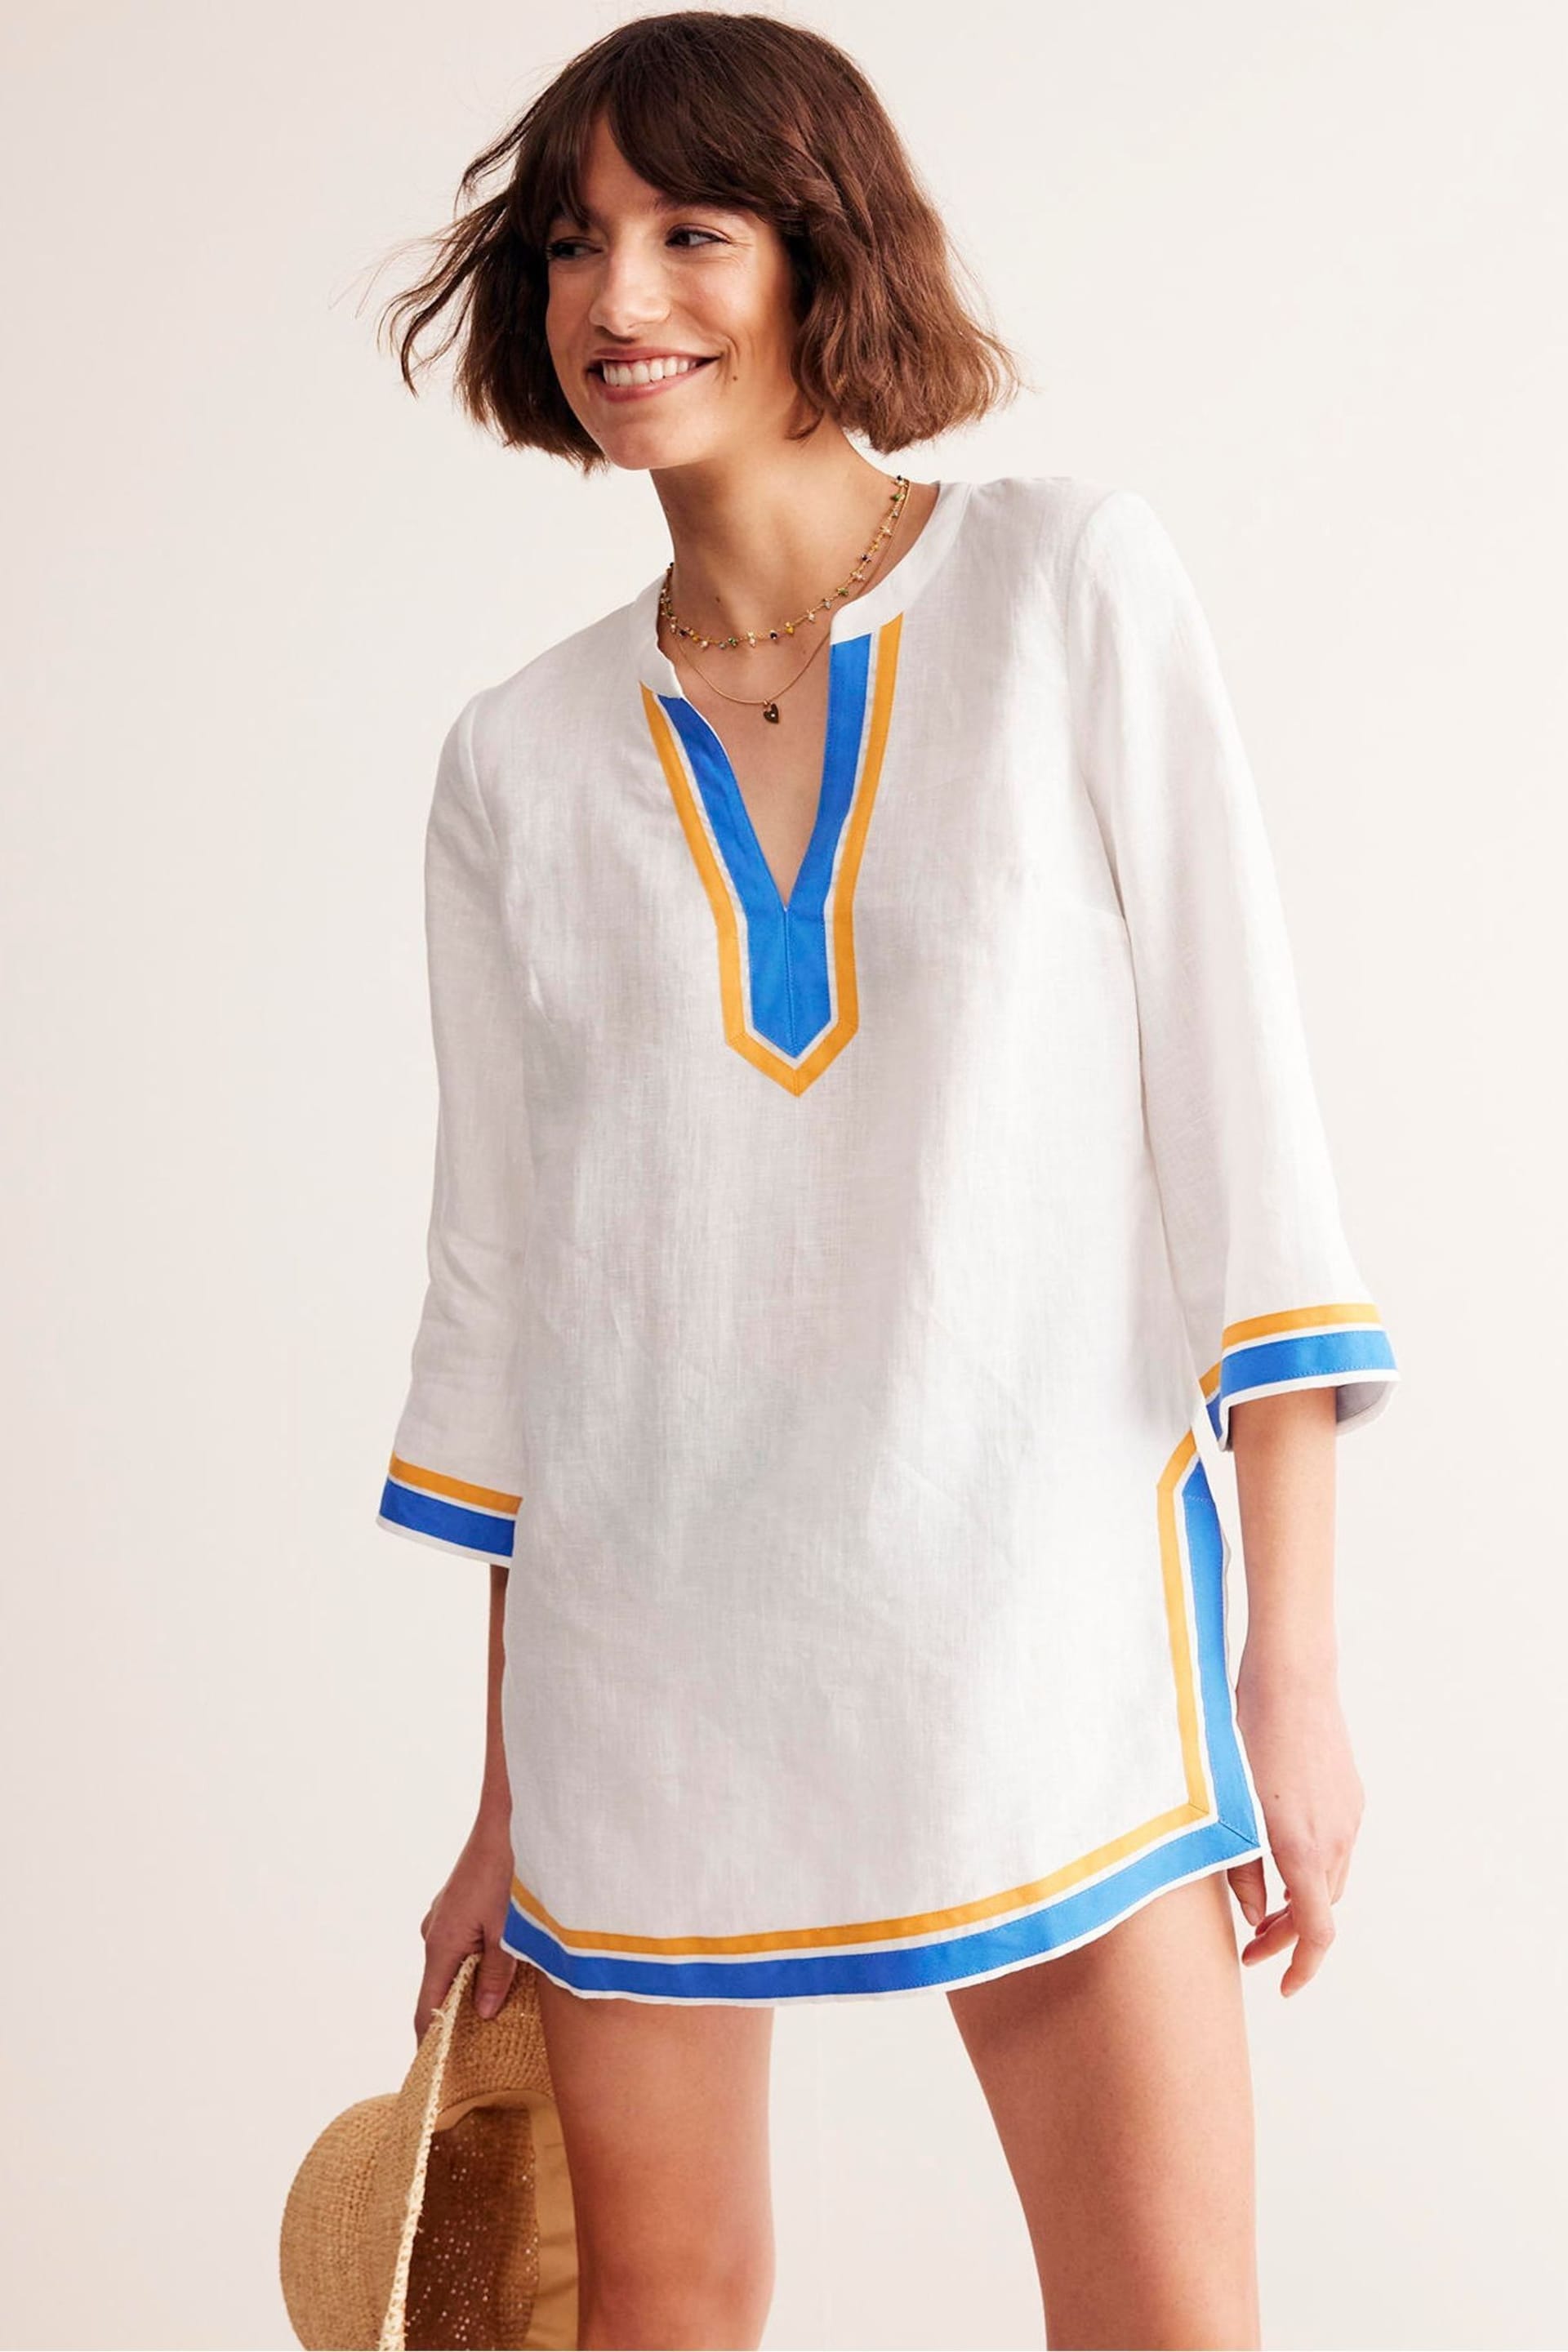 Boden White Neck Detail Tunic Top - Image 1 of 6